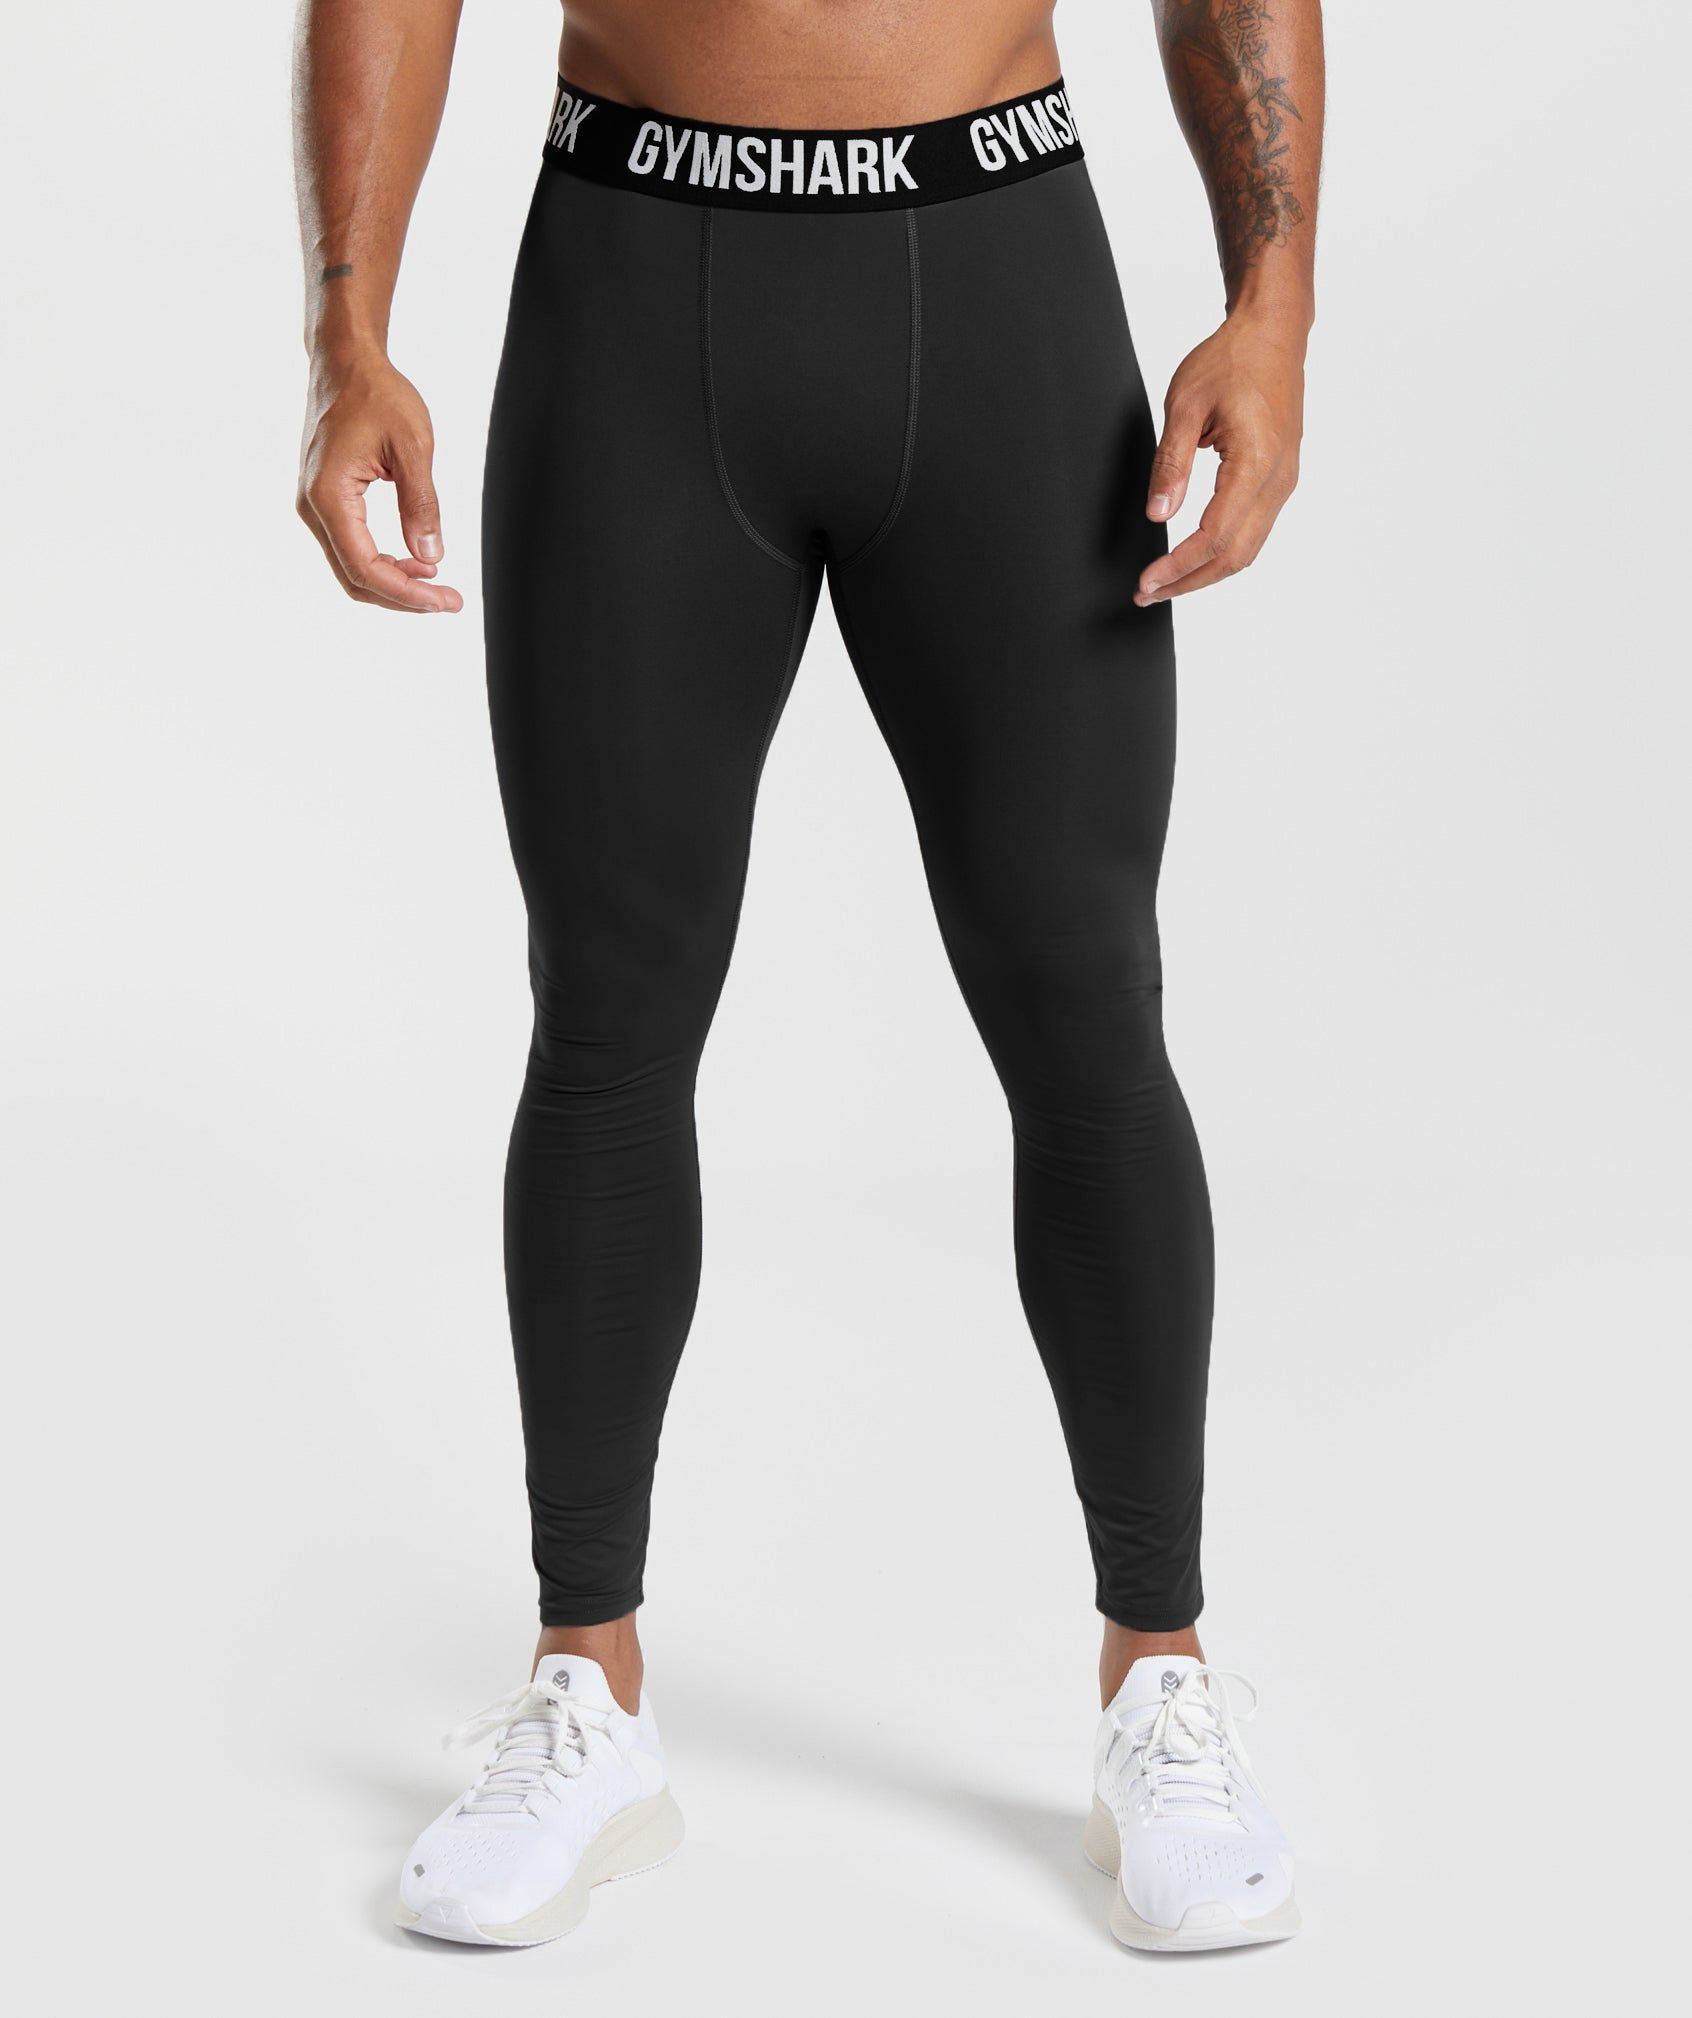 Coolomg Mens Compression Pants Running Tights Baselayer Cool Dry Long Pants Sports Leggings A